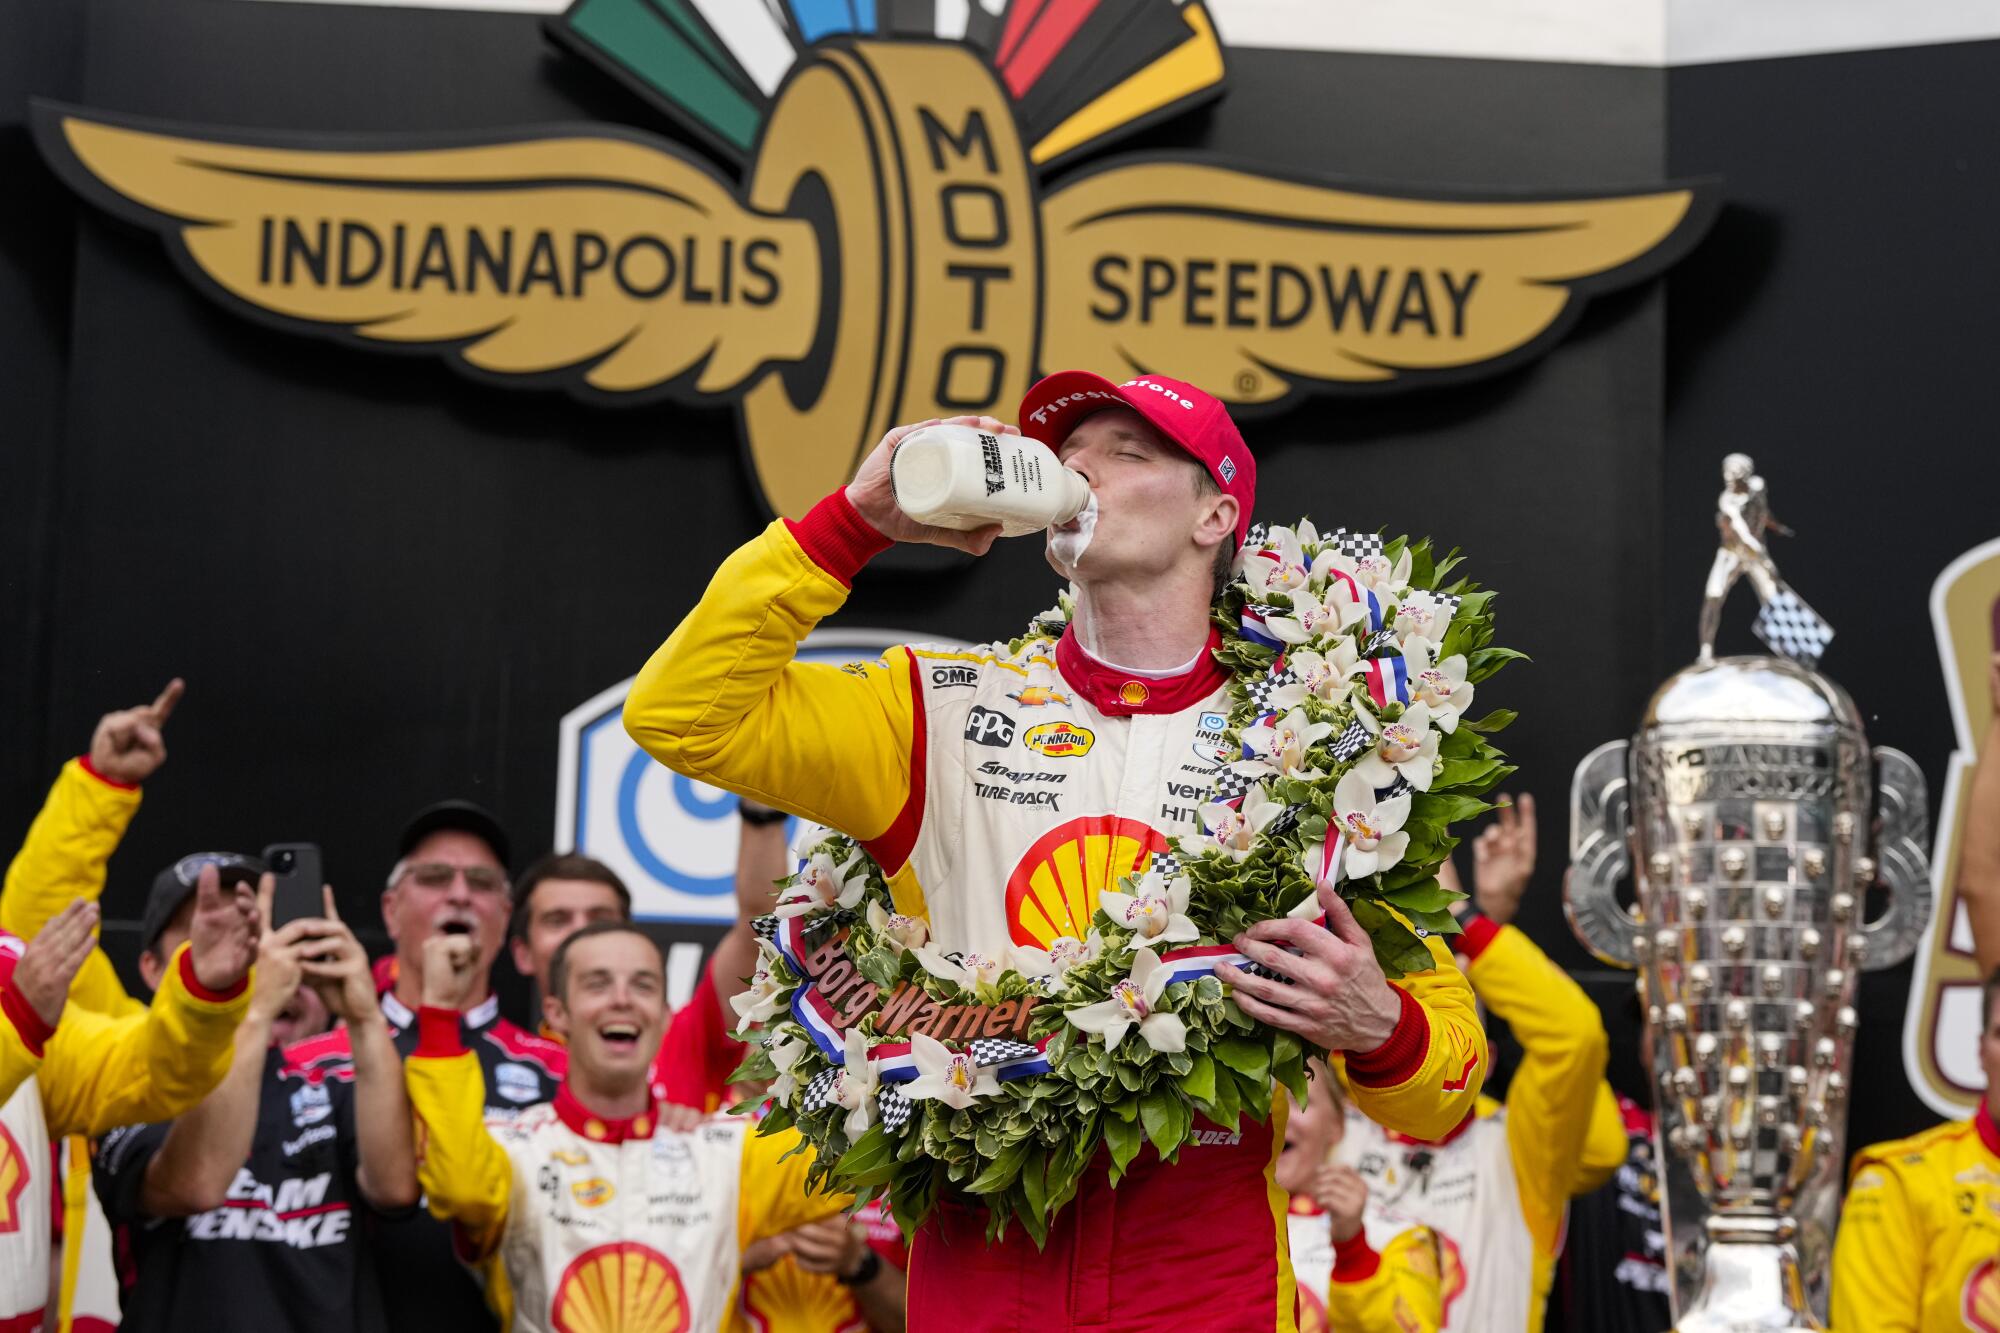 Josef Newgarden takes the traditional celebratory drink of milk after winning the Indy 500 on Sunday.